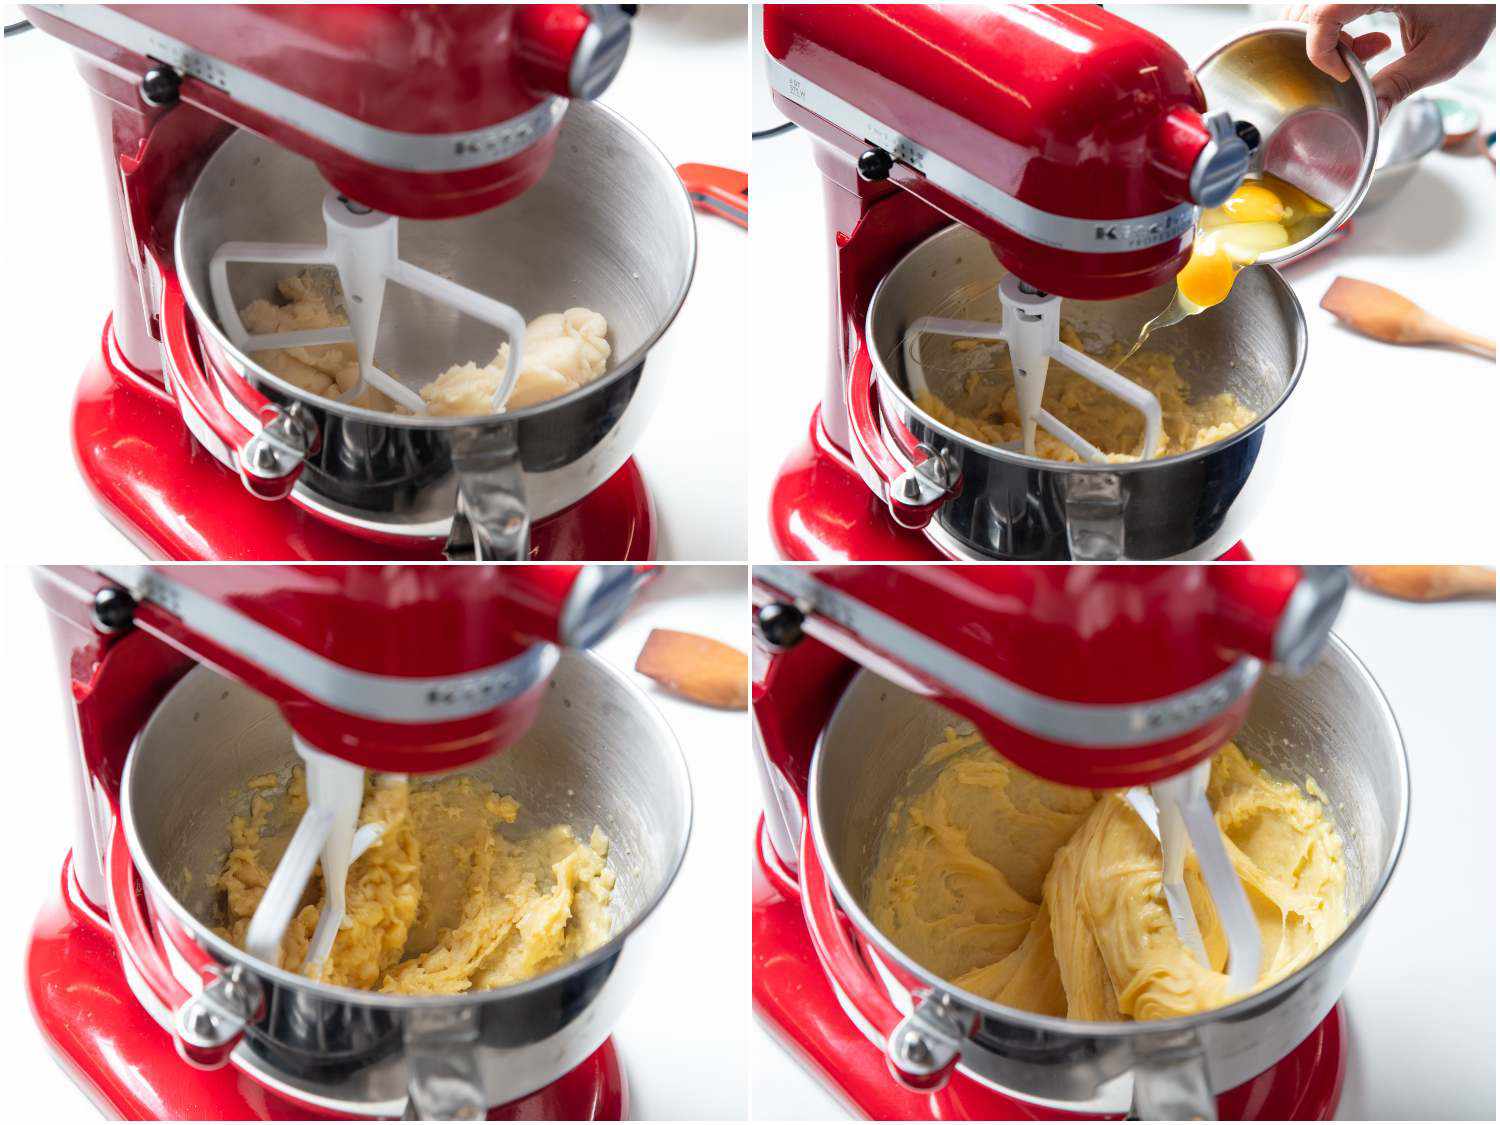 A four image collage of eggs being added and mixed with the flour paste. The top left shoes the paste in a stand mixer. The top right shows eggs being poured into the paste. The bottom left shows the paste and the eggs being mixed together. The bottom right shows the mixture fully incorporated.